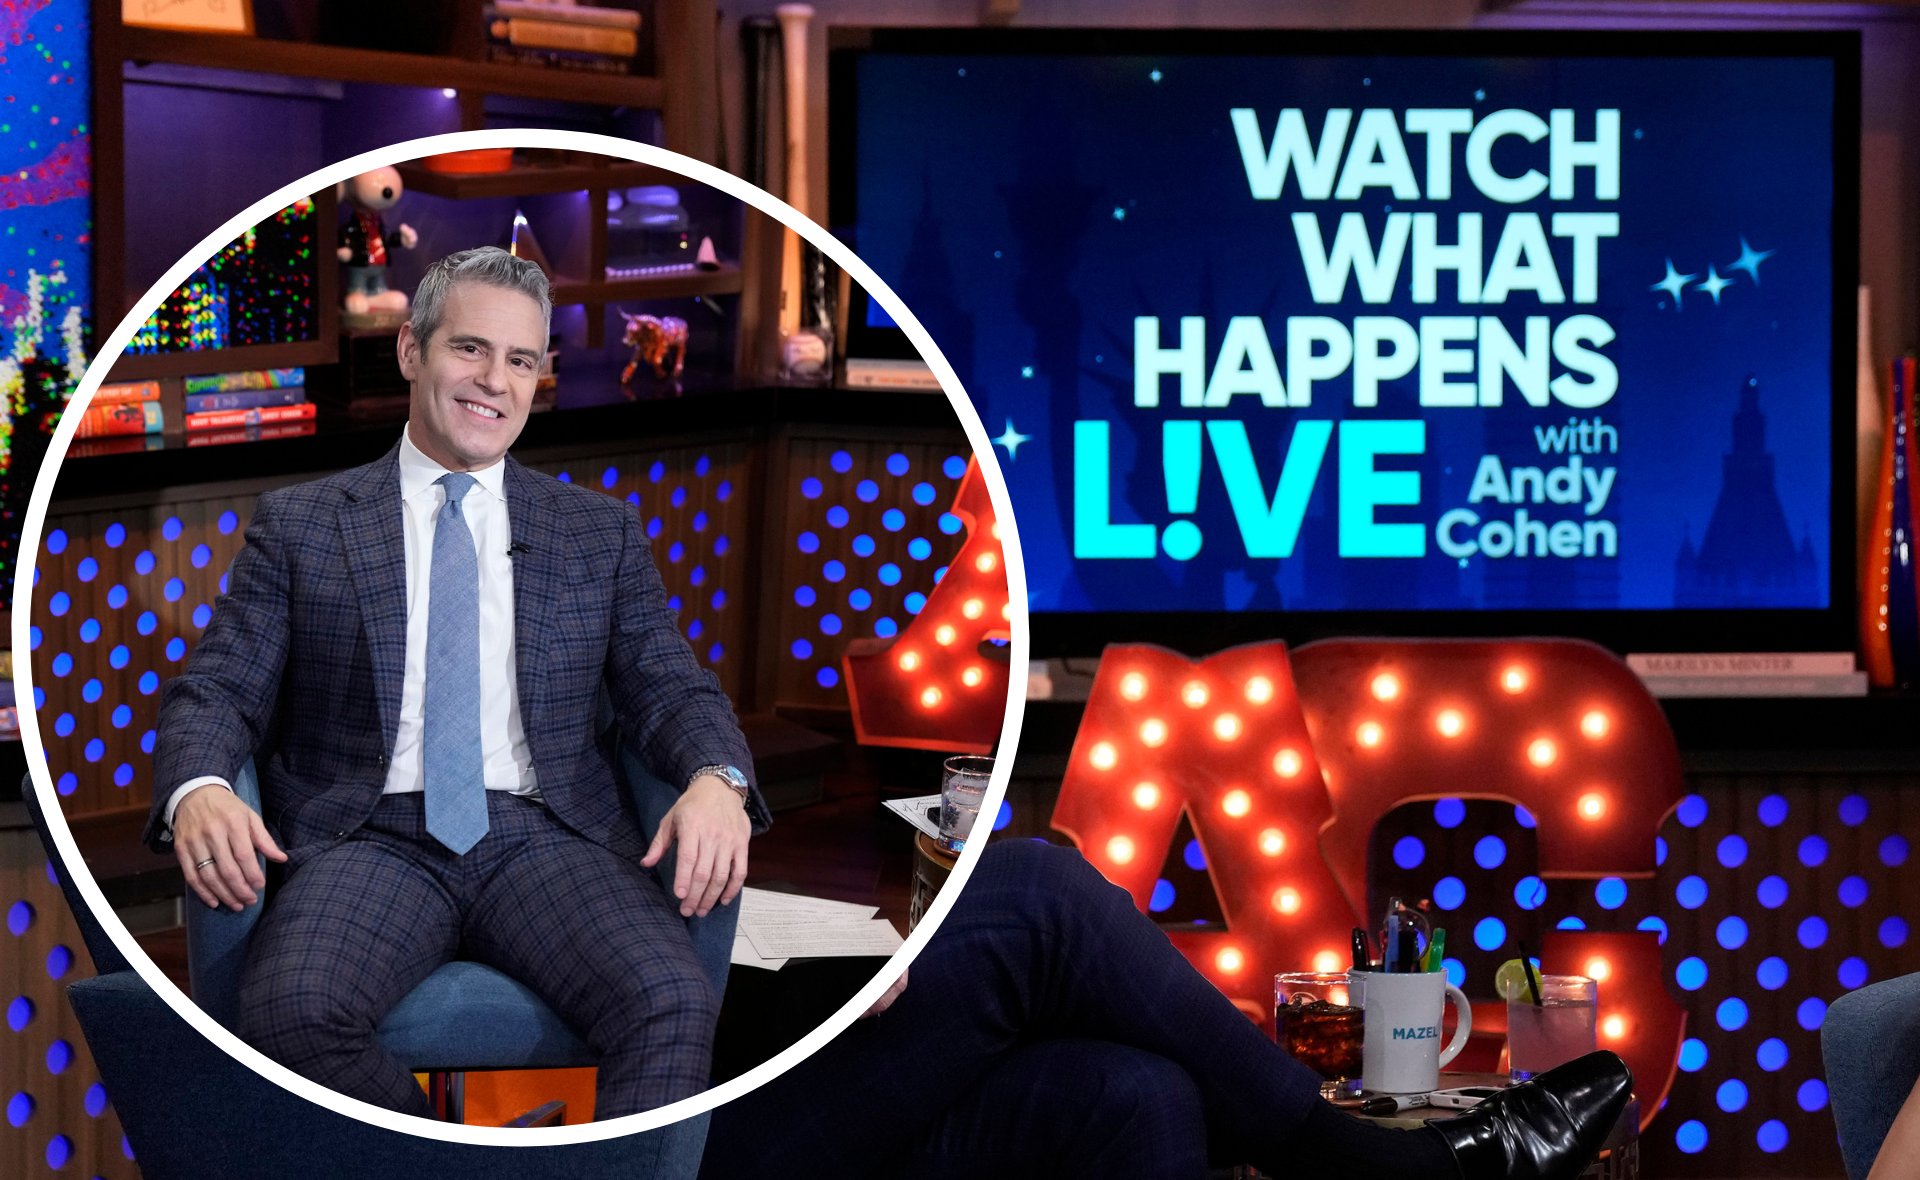 EXCLUSIVE: Andy Cohen on *THAT* infamous NYE broadcast and who he wants to interview next!